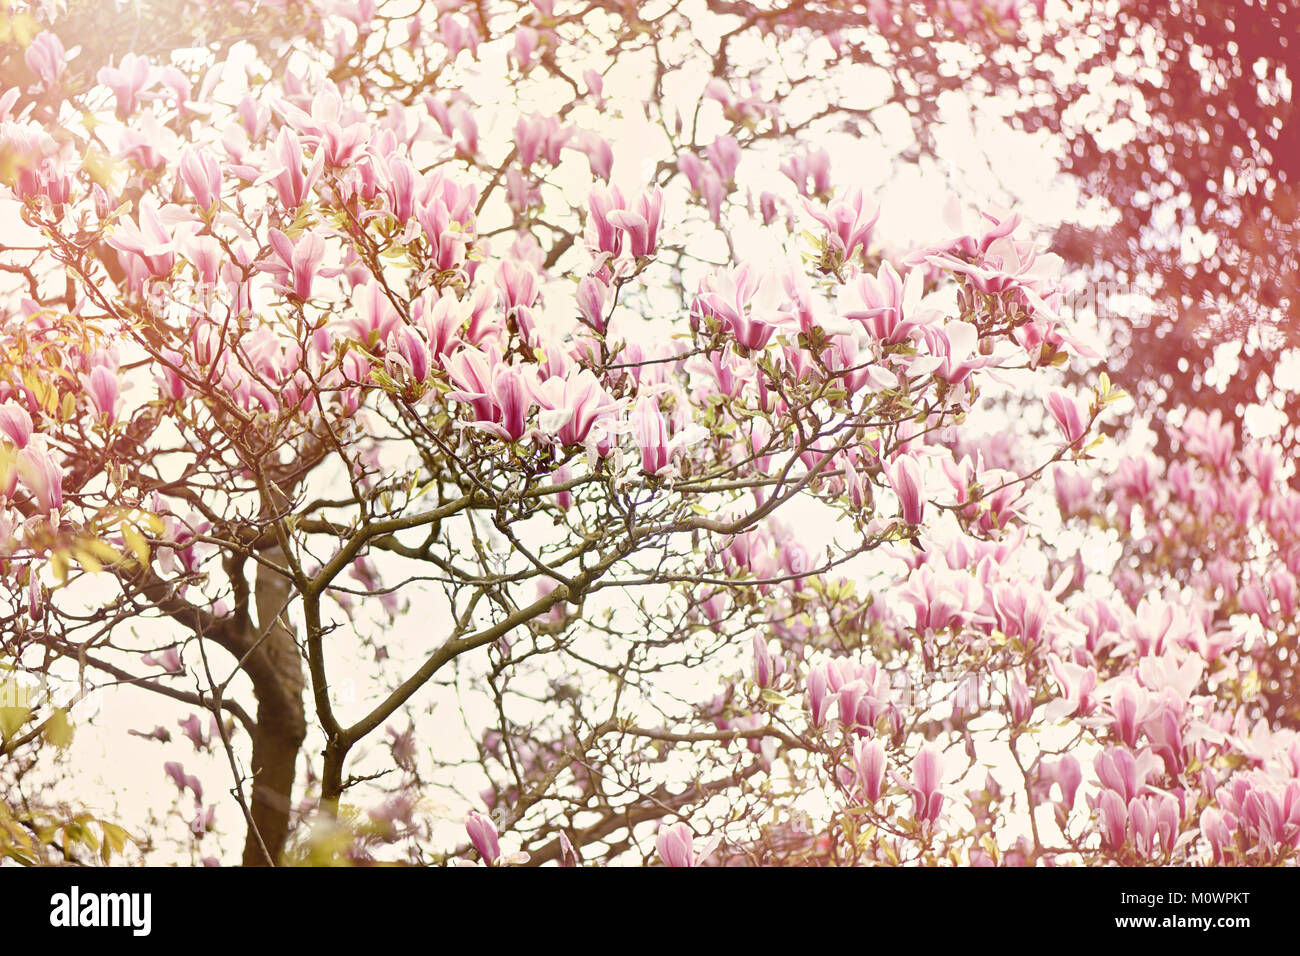 Spring flowering magnolia tree with pink flowers in hazy sunshine Stock Photo